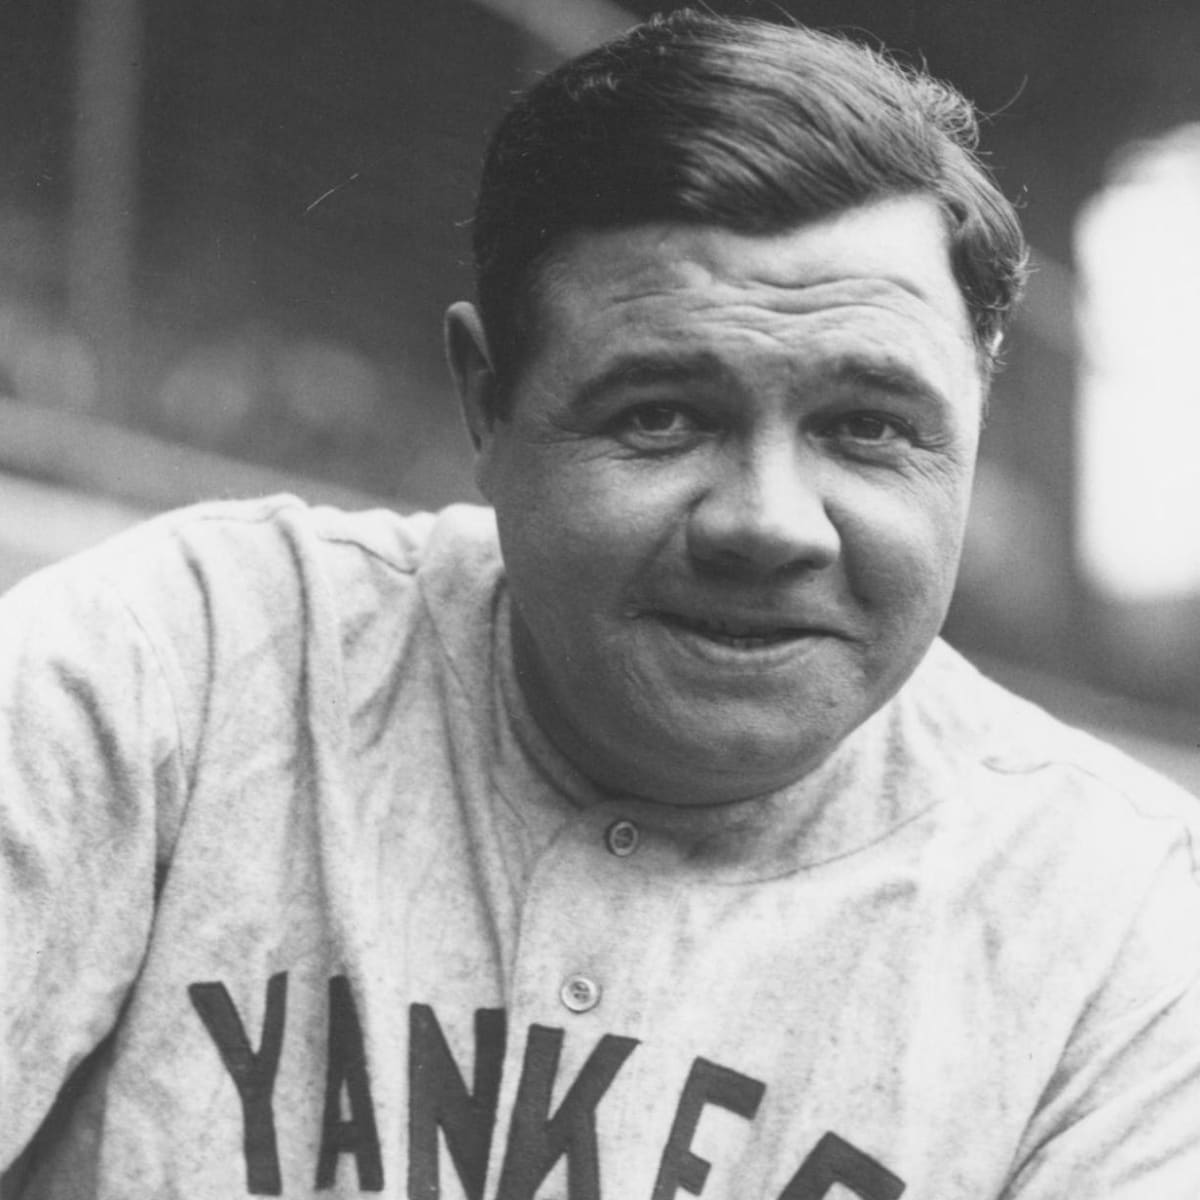 Los Angeles Dodgers' Babe Ruth bobblehead giveaway is nonsense